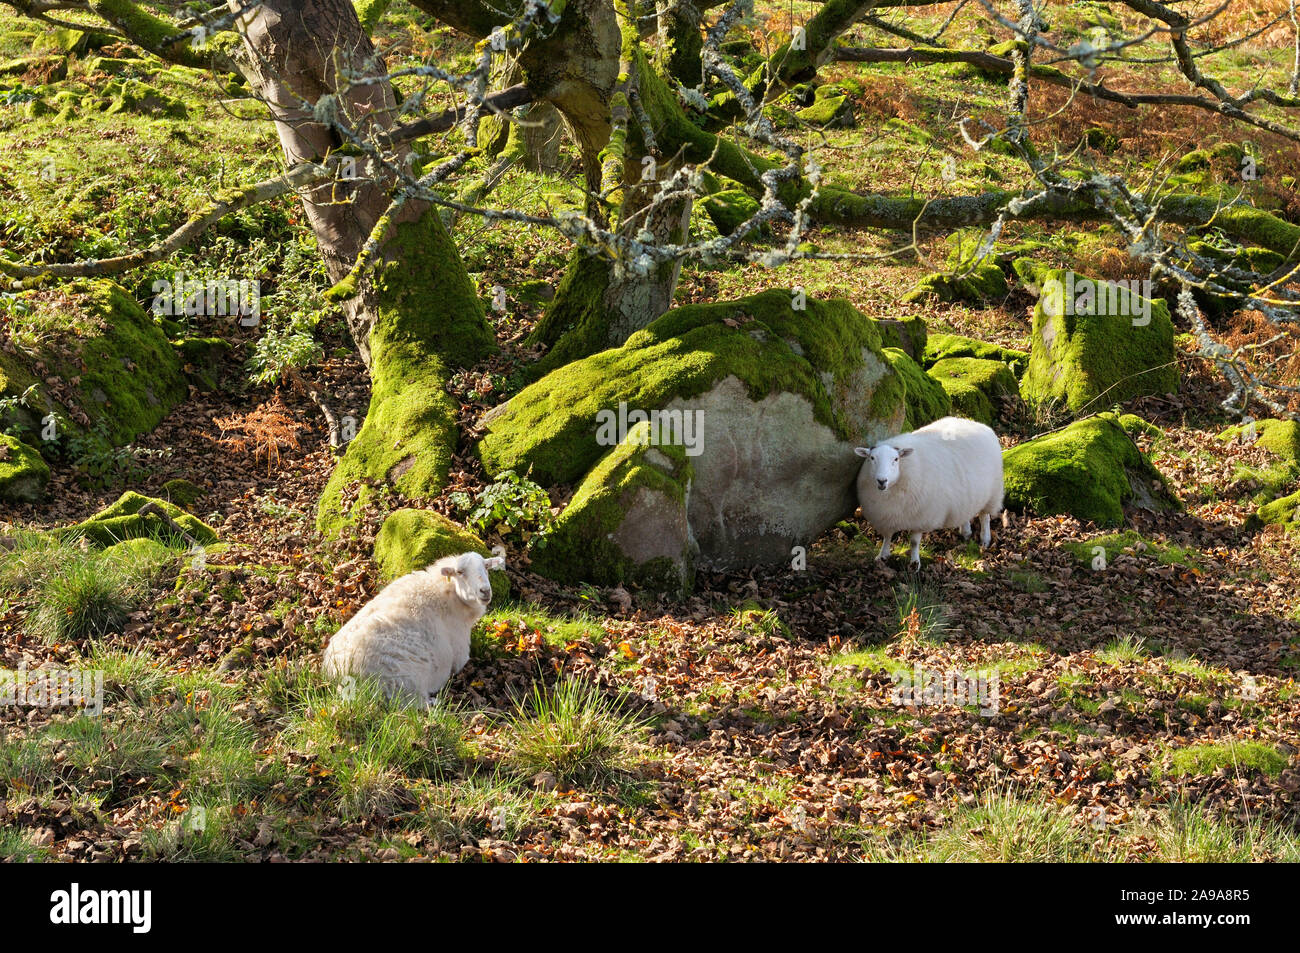 Two sheep resting under a tree in sunshine and shade next to mossy rocks and autumn leaf litter, Peak District, Derbyshire, England, UK Stock Photo